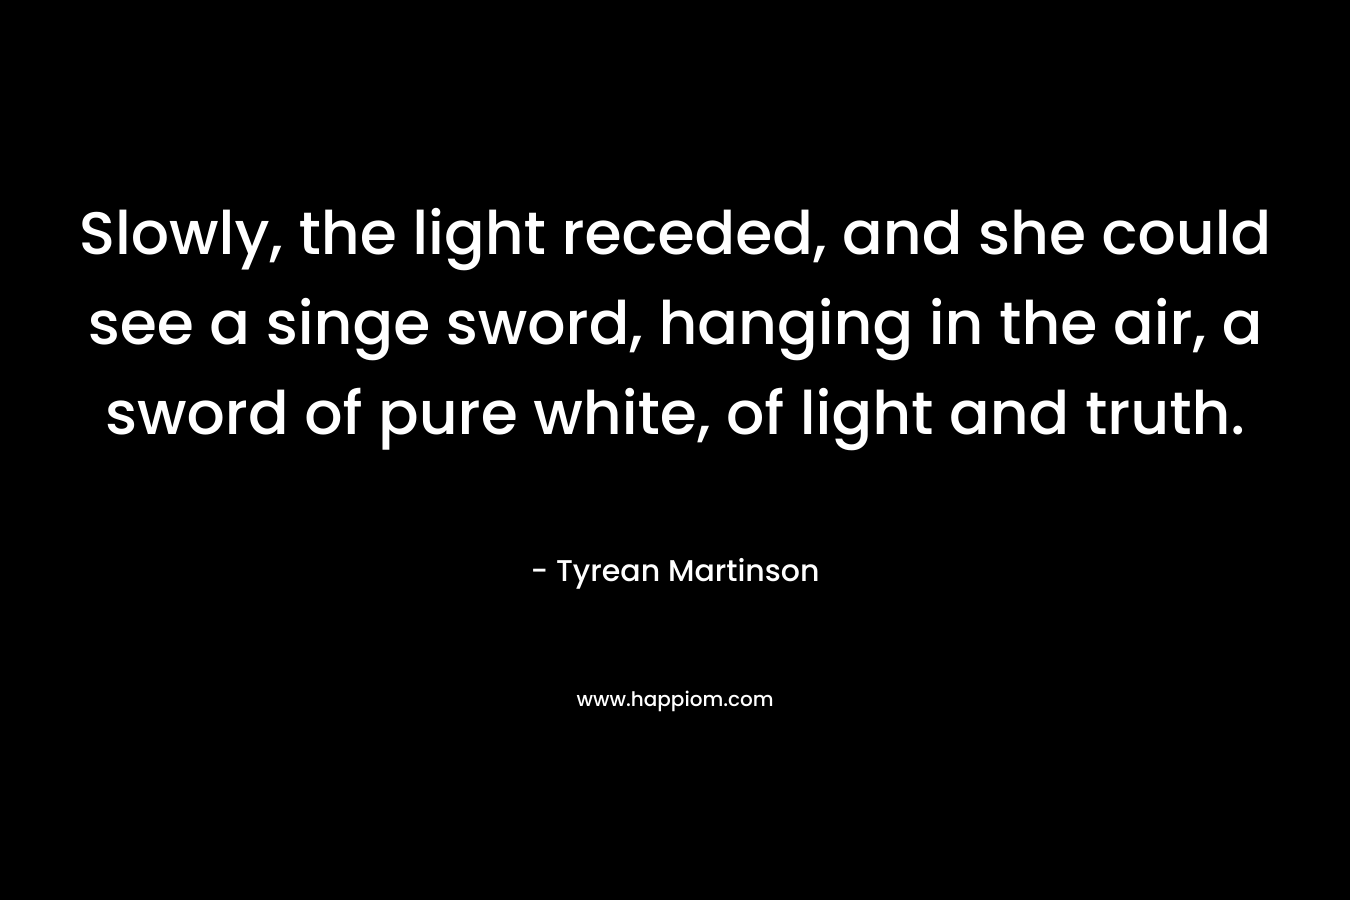 Slowly, the light receded, and she could see a singe sword, hanging in the air, a sword of pure white, of light and truth.